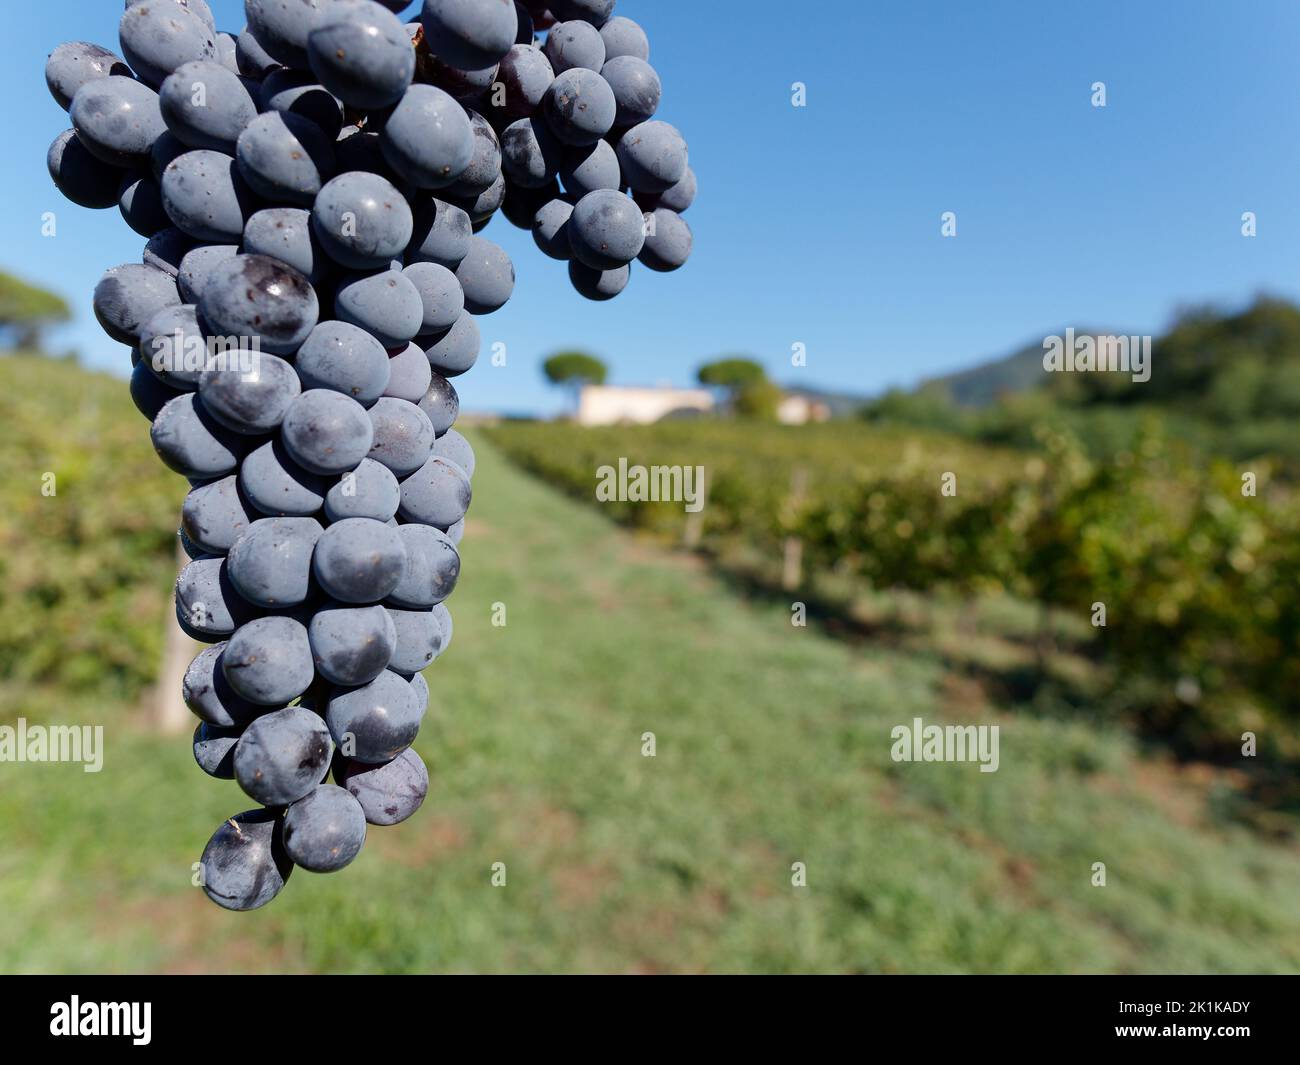 Bunch of grapes ready to harvest in an organic vineyard. Camigliano, Lucca Province, Tuscany, Italy Stock Photo